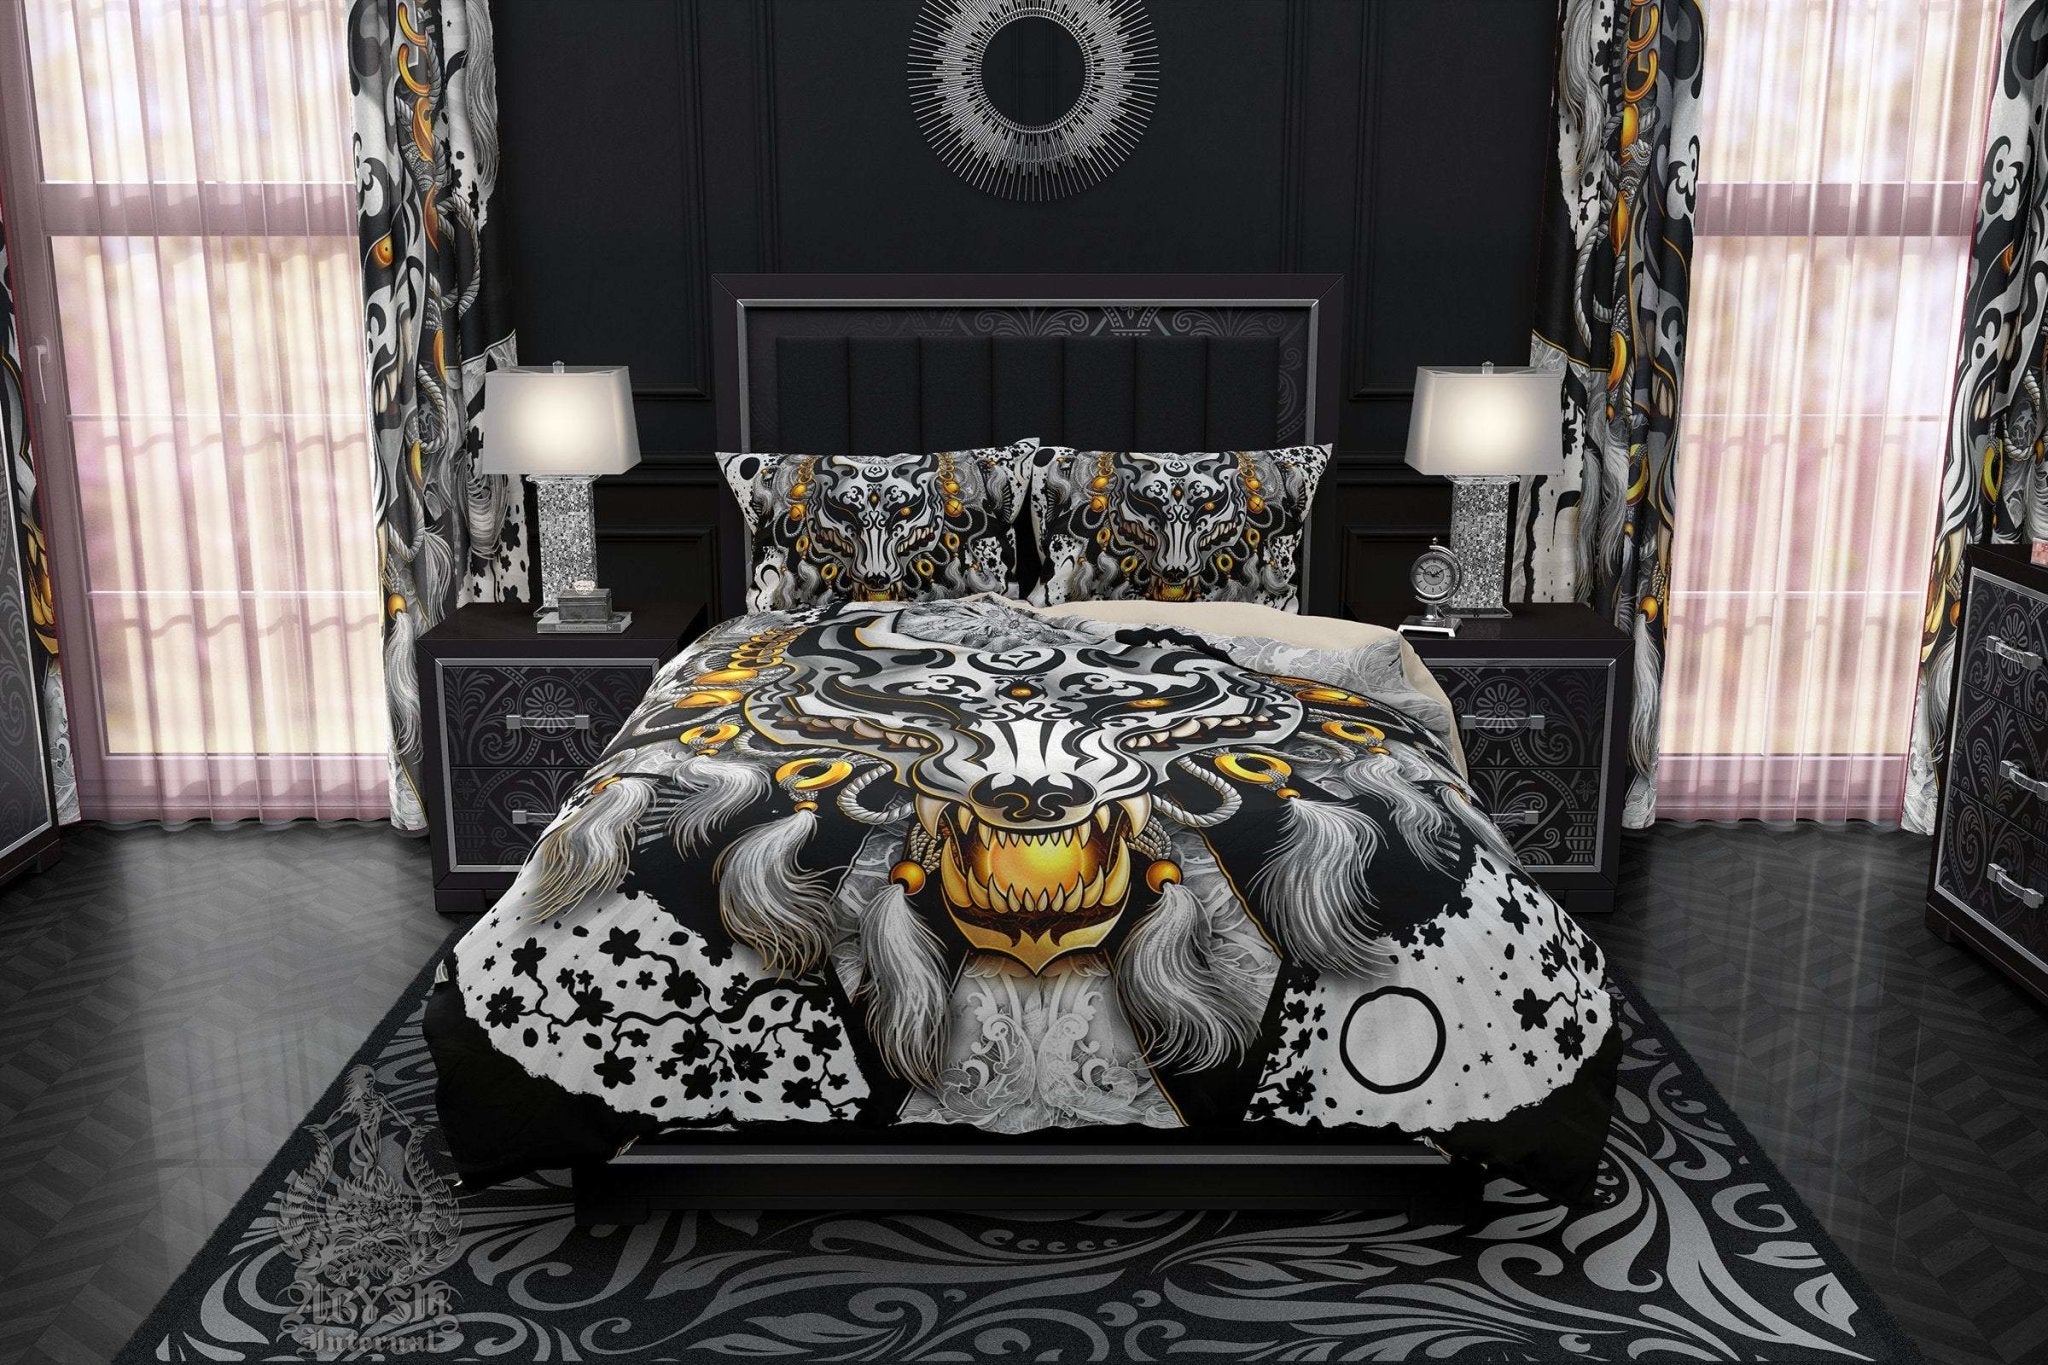 Kitsune Mask Bedding Set, Comforter and Duvet, Gamer Bed Cover and Bedroom Decor, Fox Okami, Anime Art, King, Queen and Twin Size - Black and White Goth II - Abysm Internal